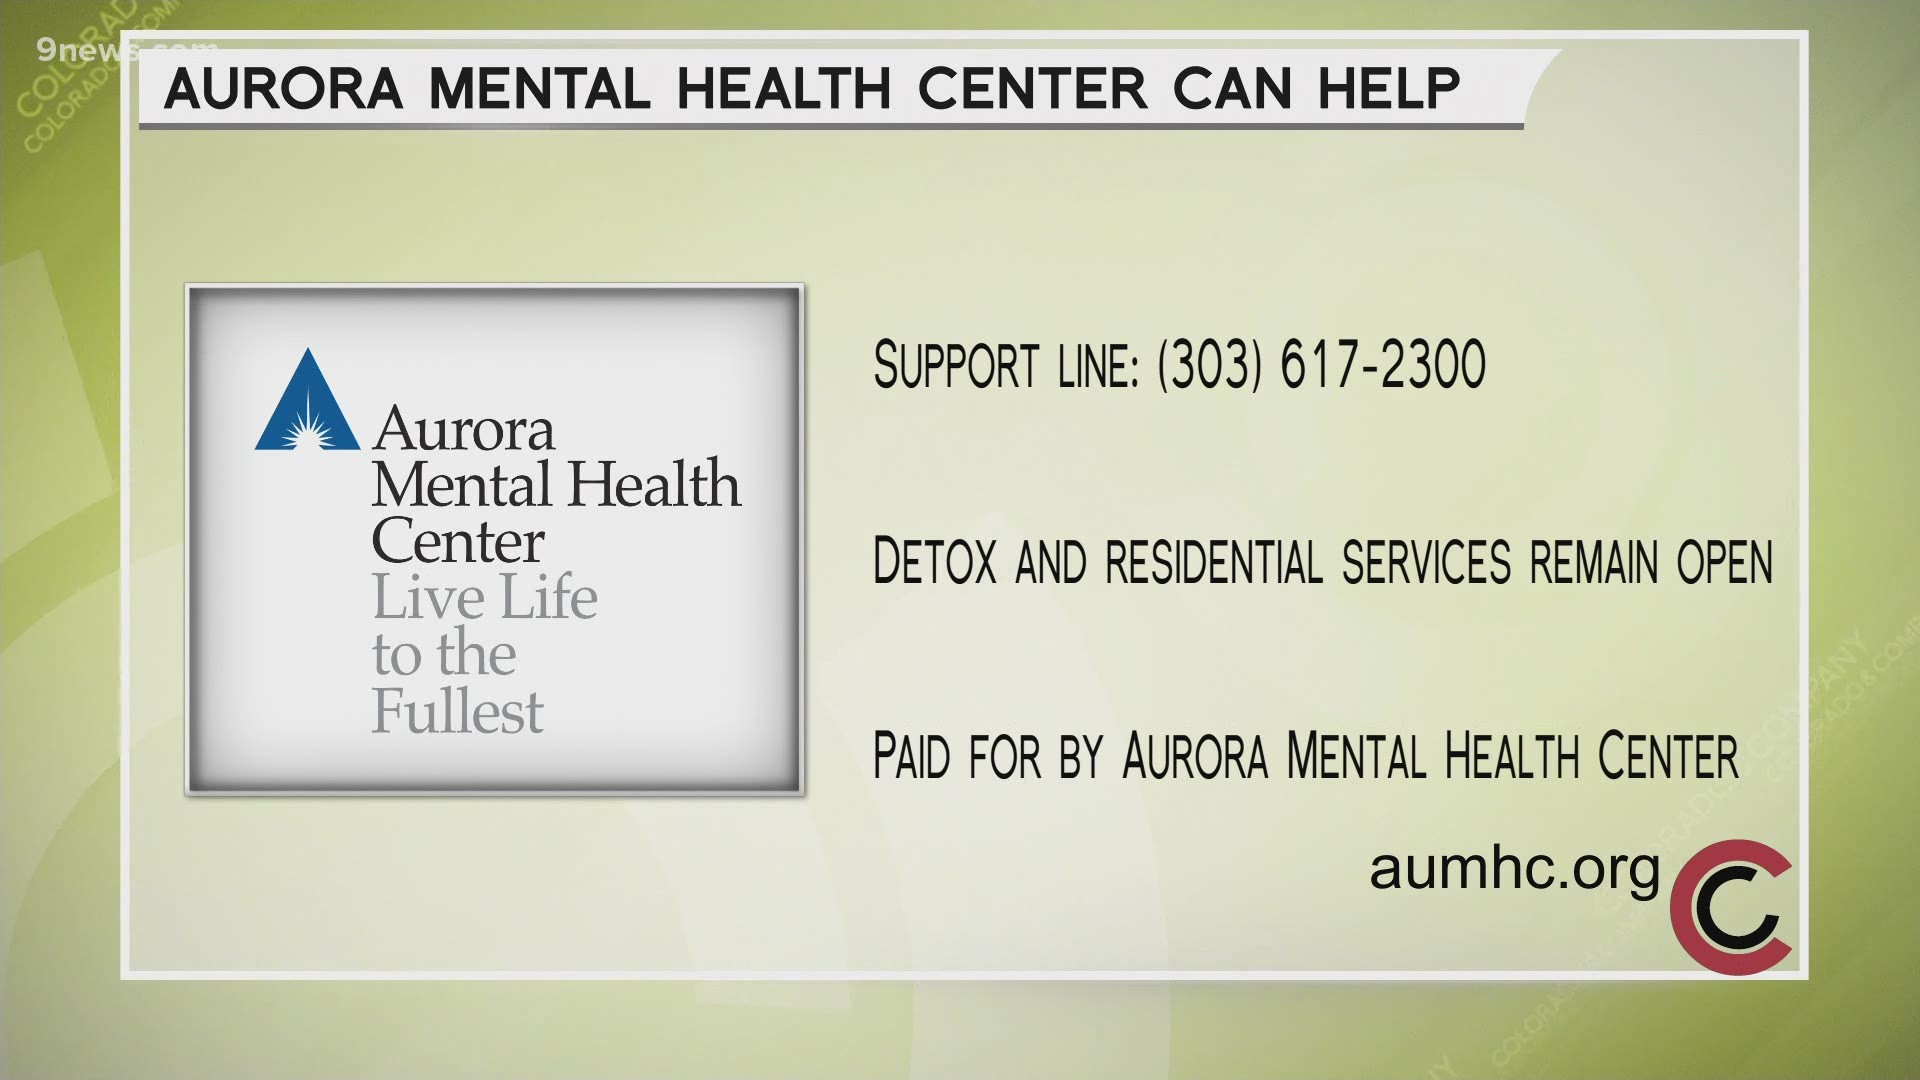 Call the support line at 303.617.2300 to talk to someone who can help. Residential and Detox services are still open. Learn more at AUMHC.org.